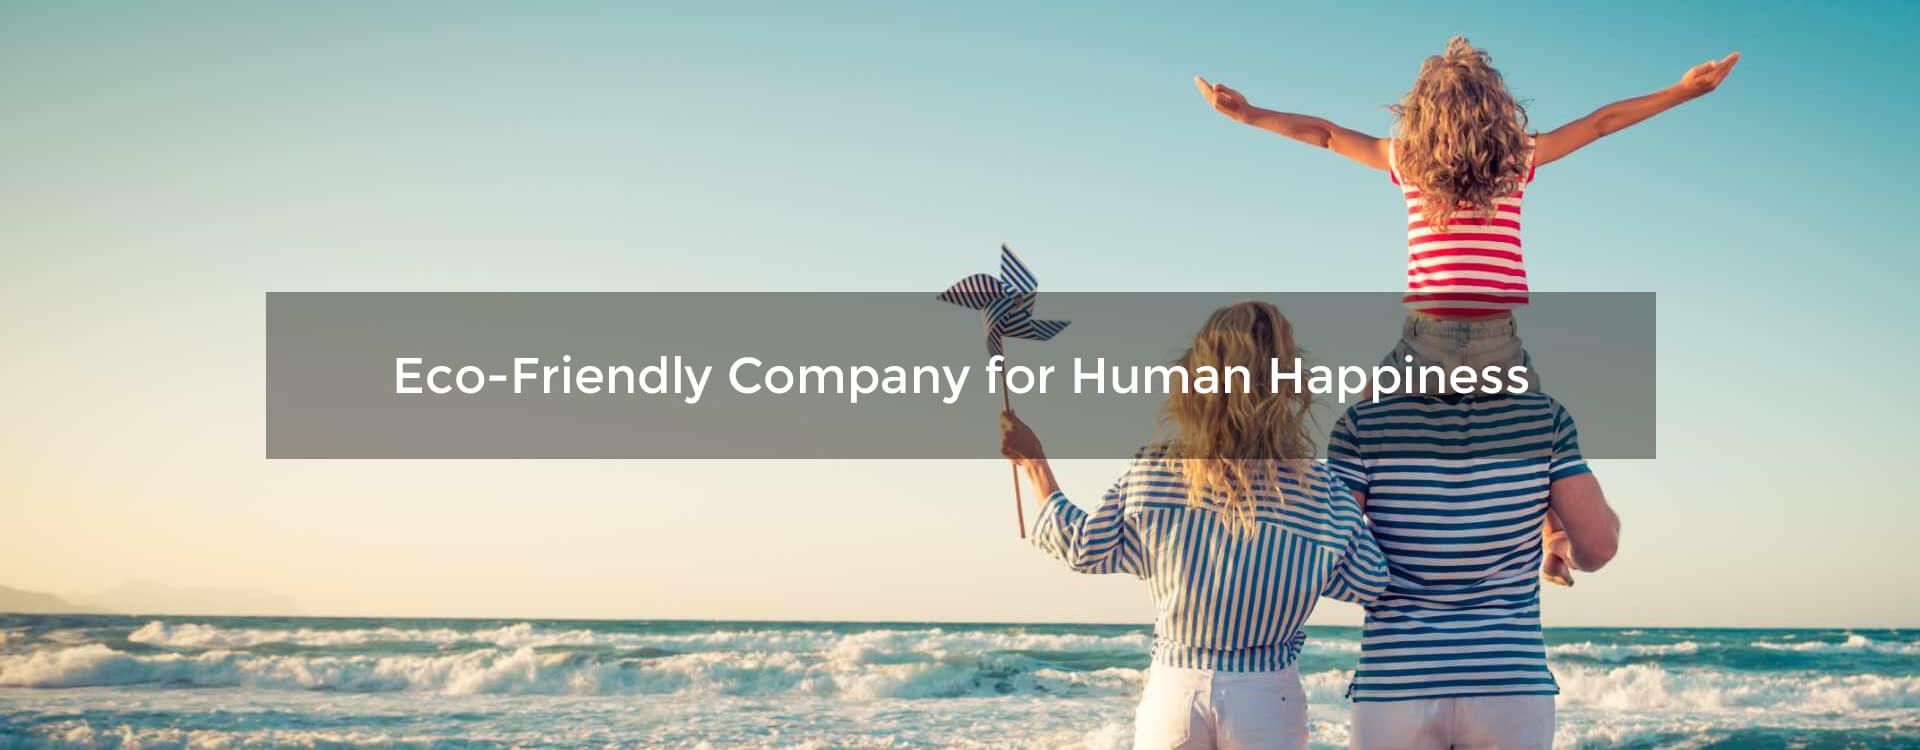 Eco-Friendly Company for Human Happiness